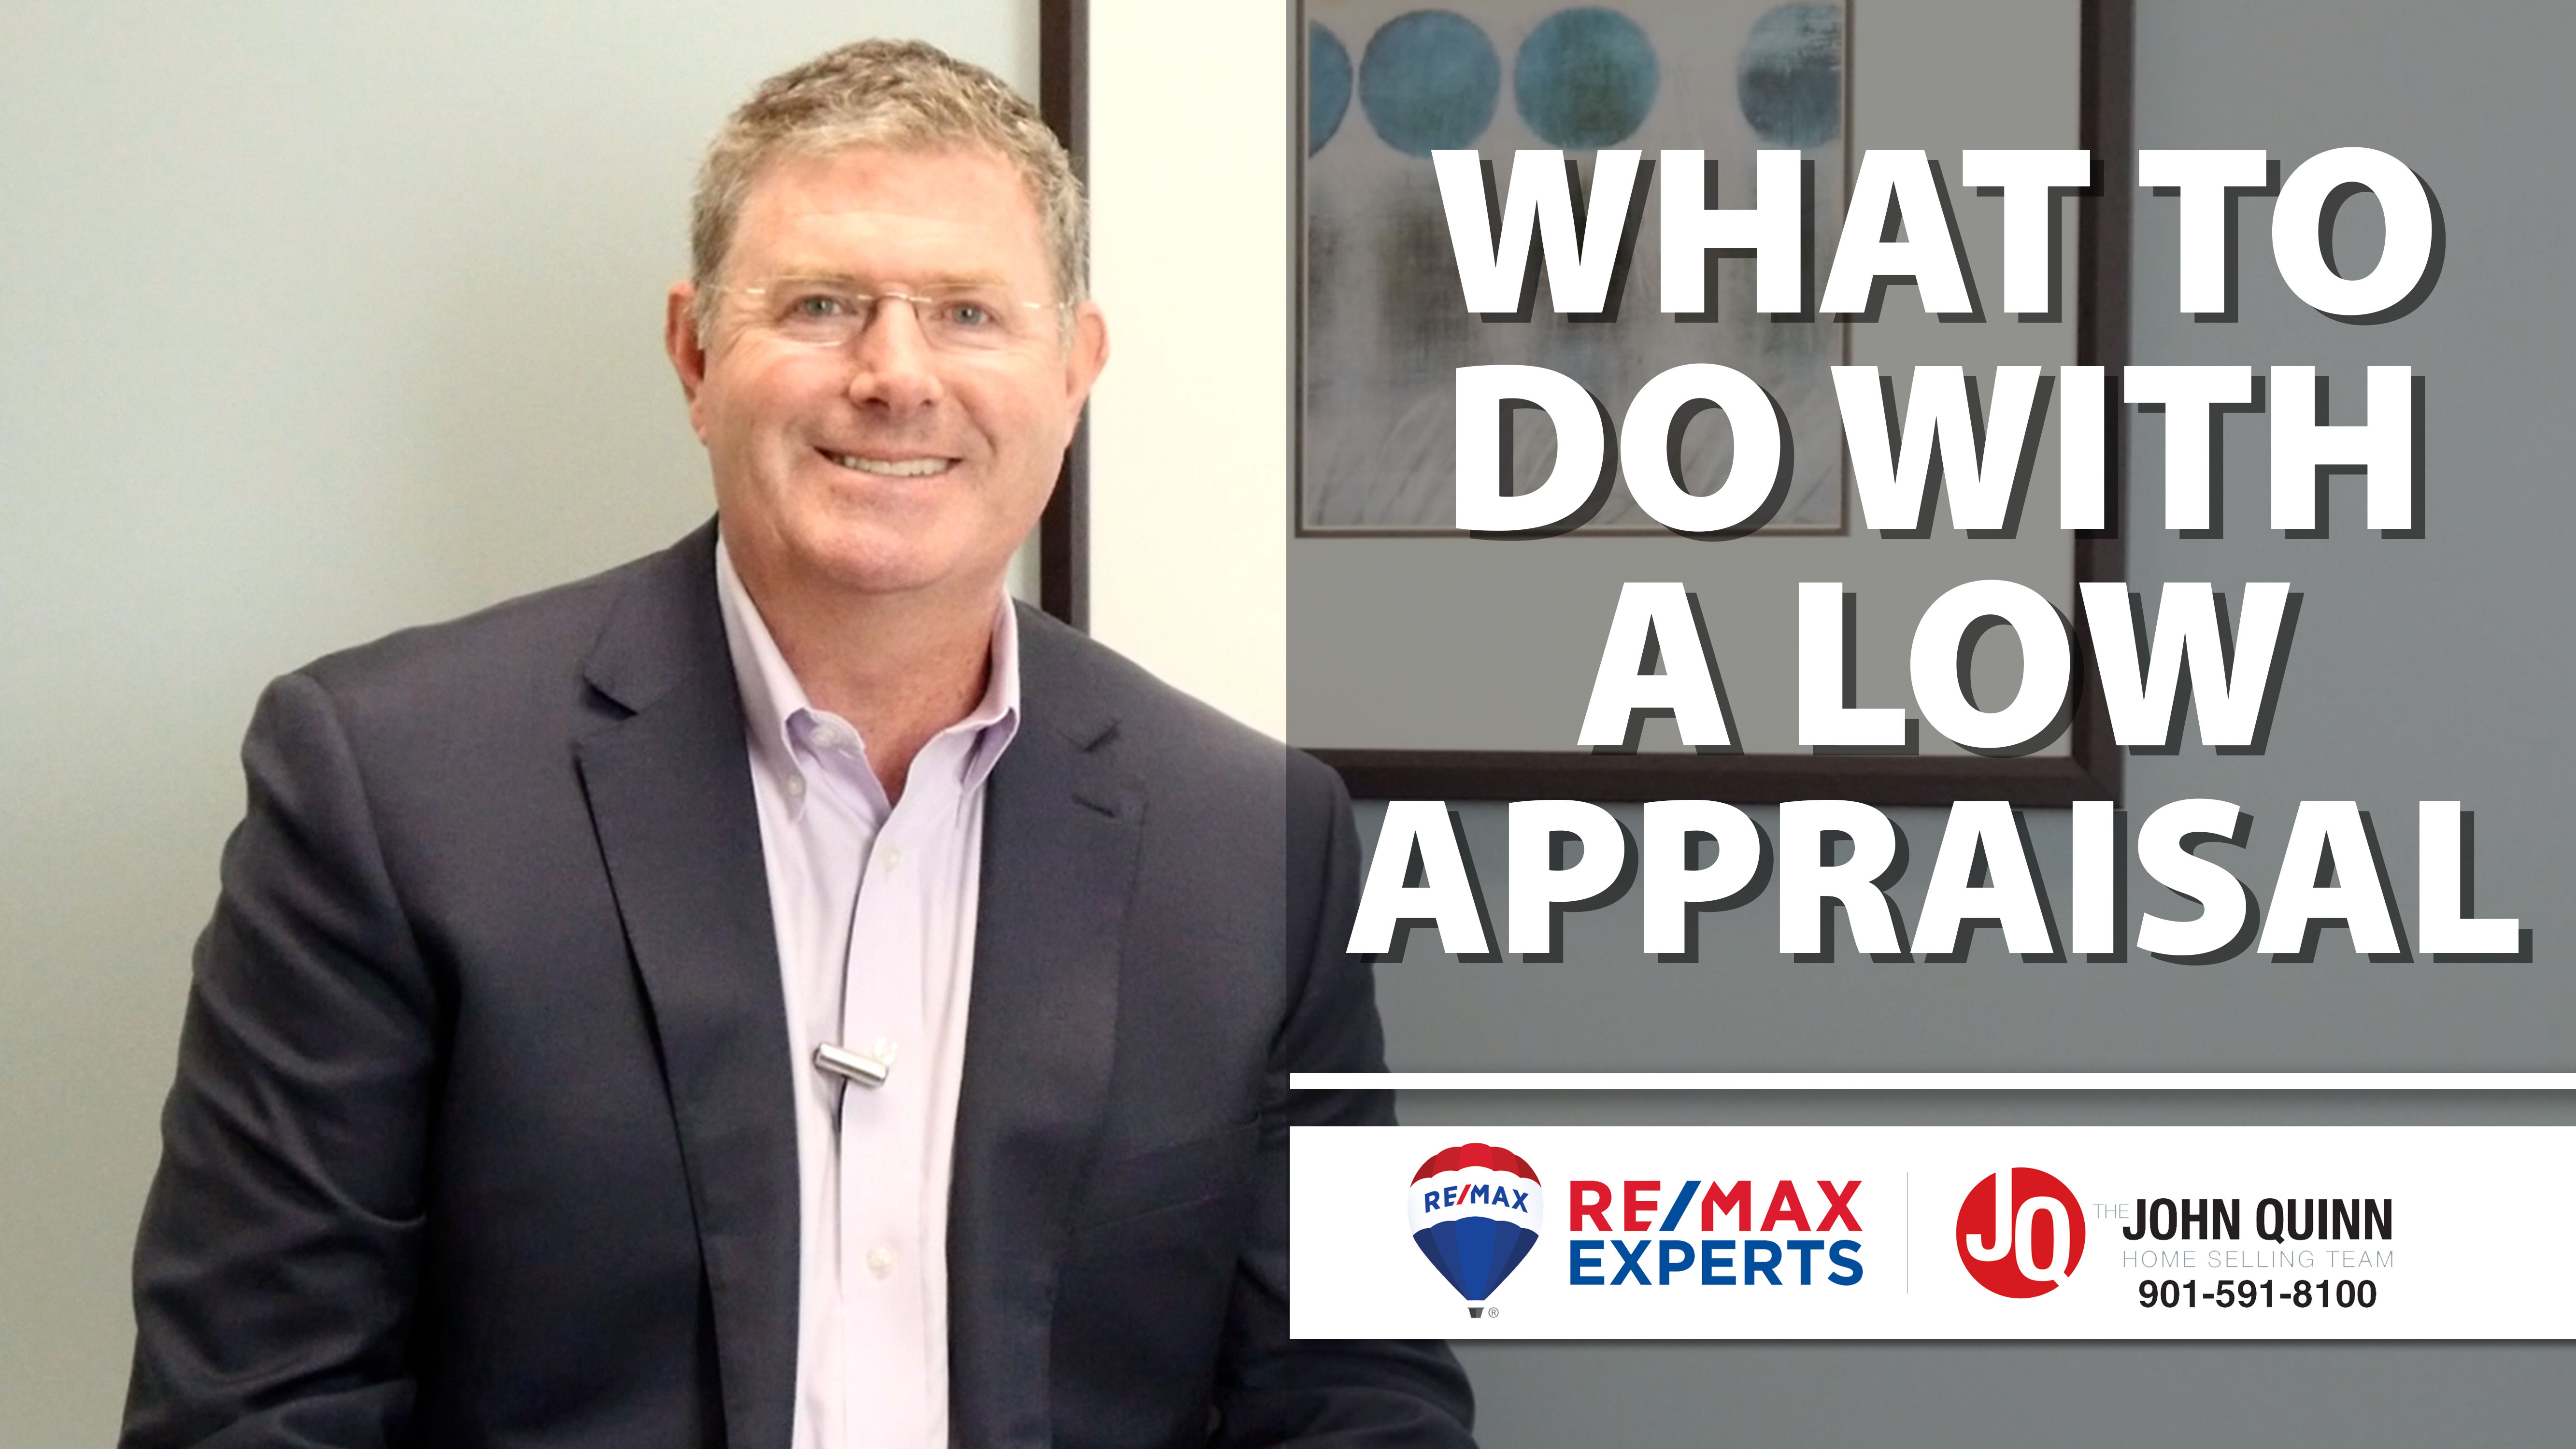 How Should I Handle a Low Appraisal?